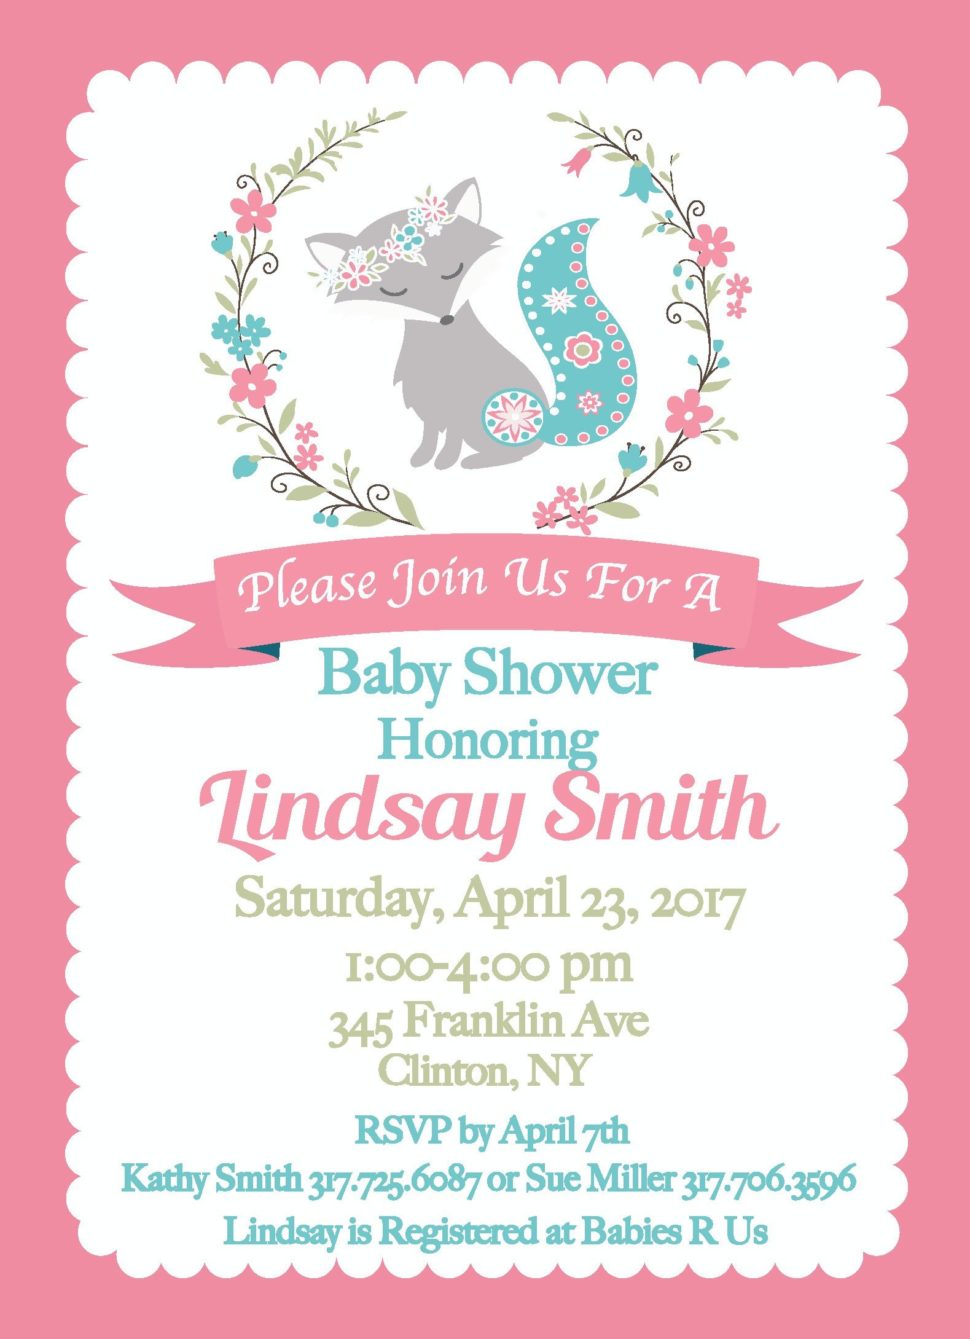 Medium Size of Baby Shower:delightful Baby Shower Invitation Wording Picture Designs Baby Shower Invitation Wording Baby Boy Shower Favors Baby Shower Baby Shower Baby Shower Adalah Baby Shower Quotes Baby Shower Wishing Well Best Baby Shower Gifts 2018 Corner Baby Shower Thank You Cards Wording Gallery Bridal